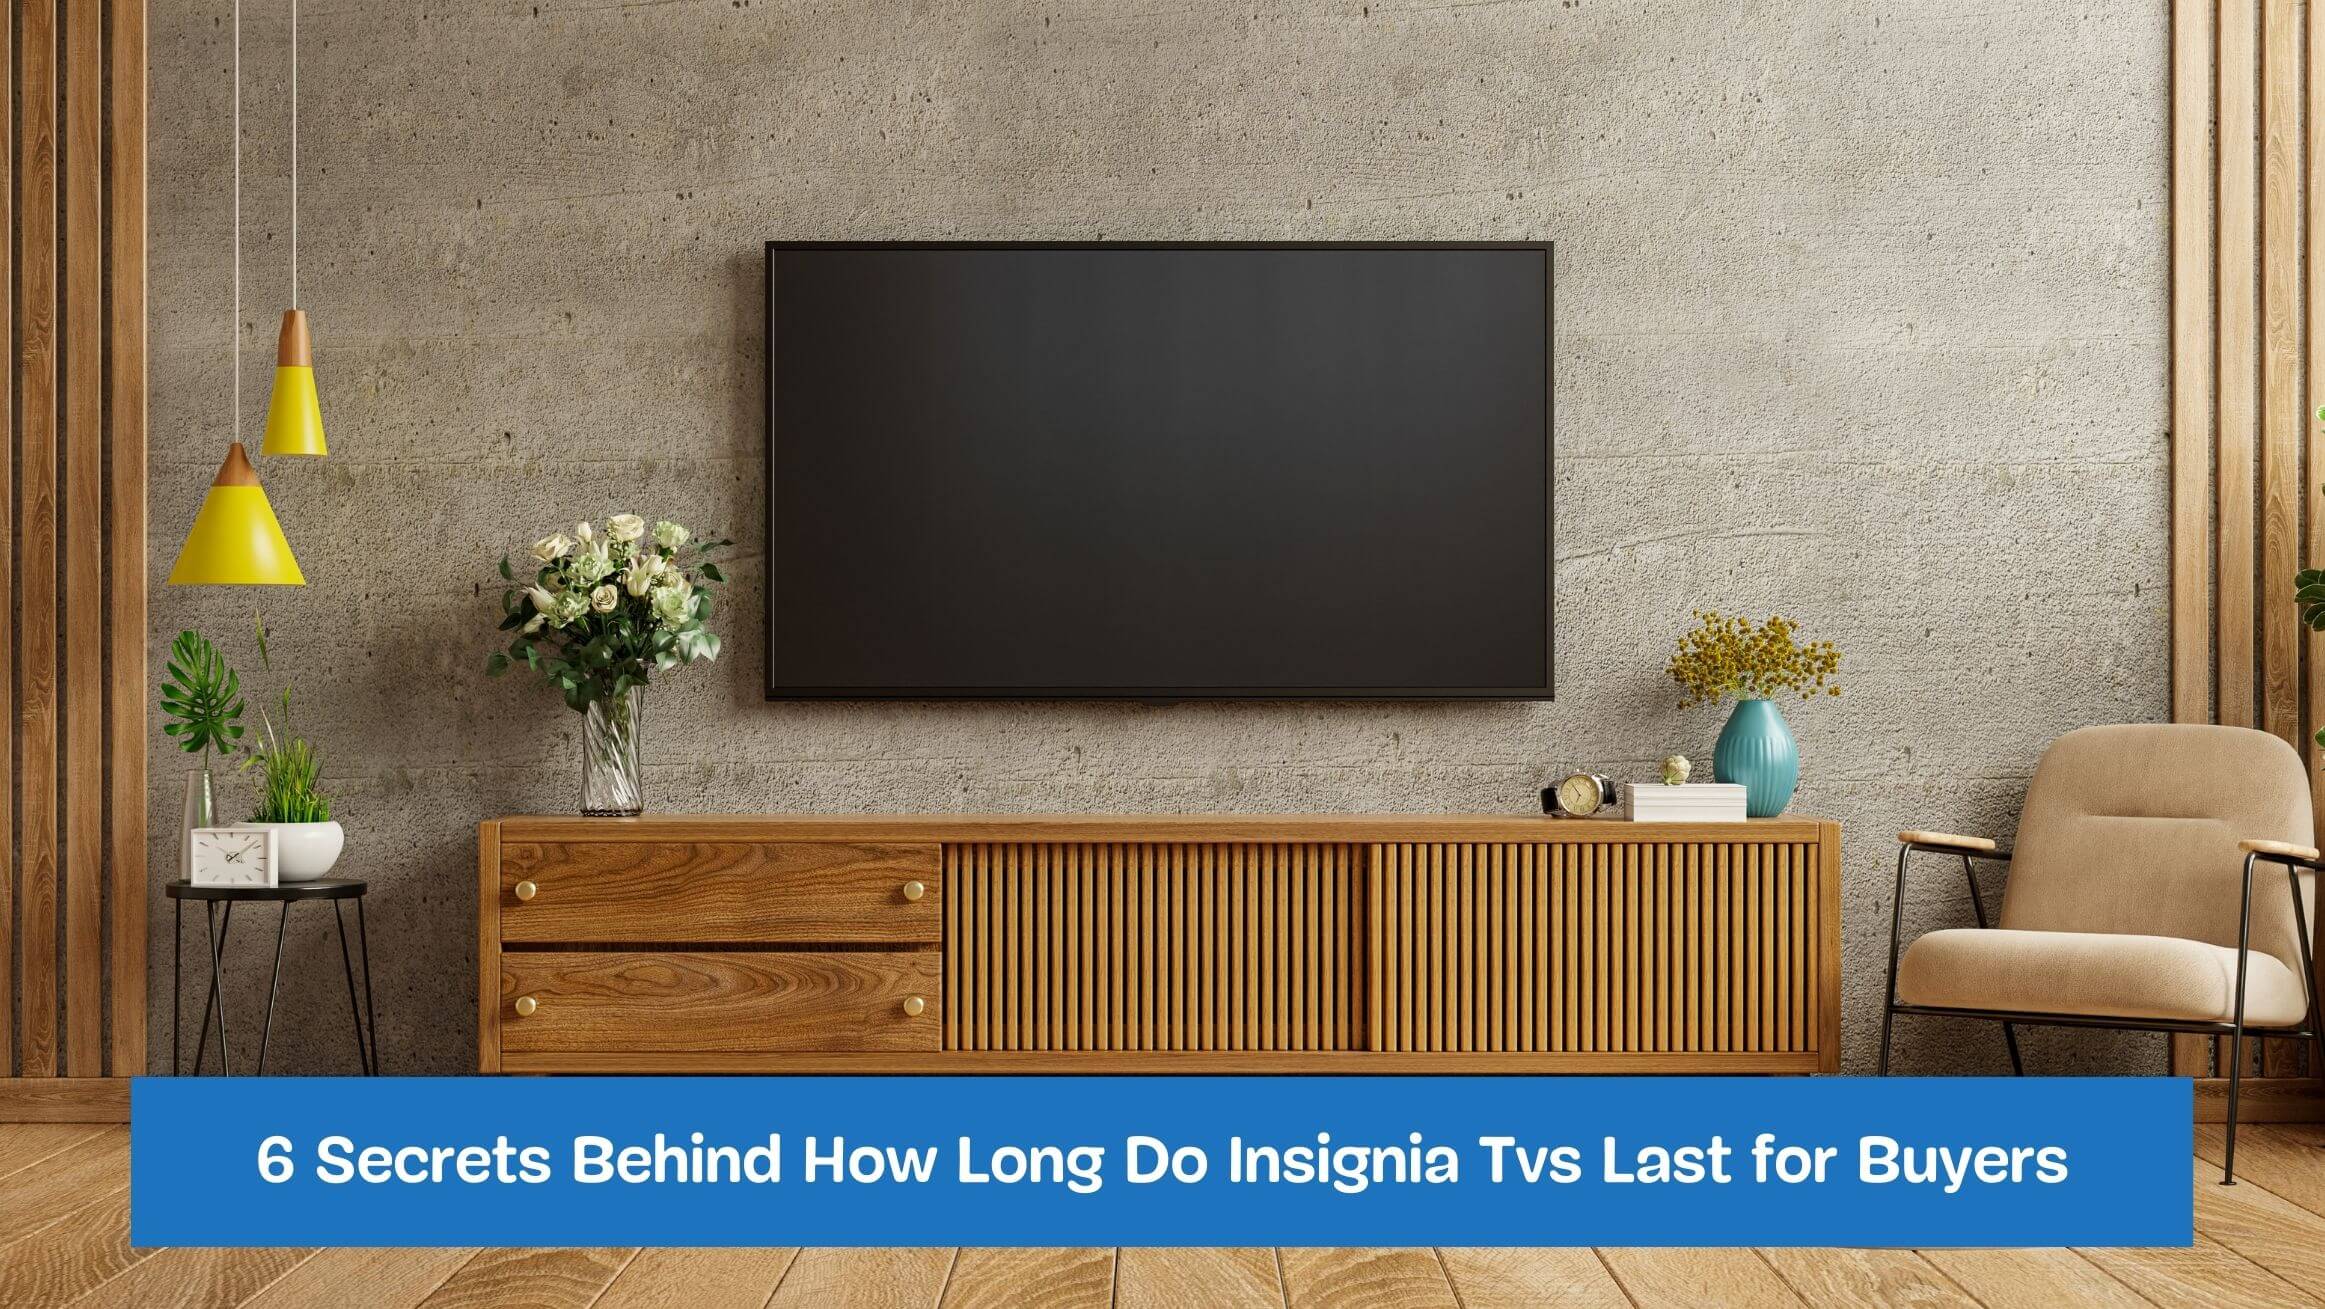 6 Secrets Behind How Long Do Insignia Tvs Last for Buyers